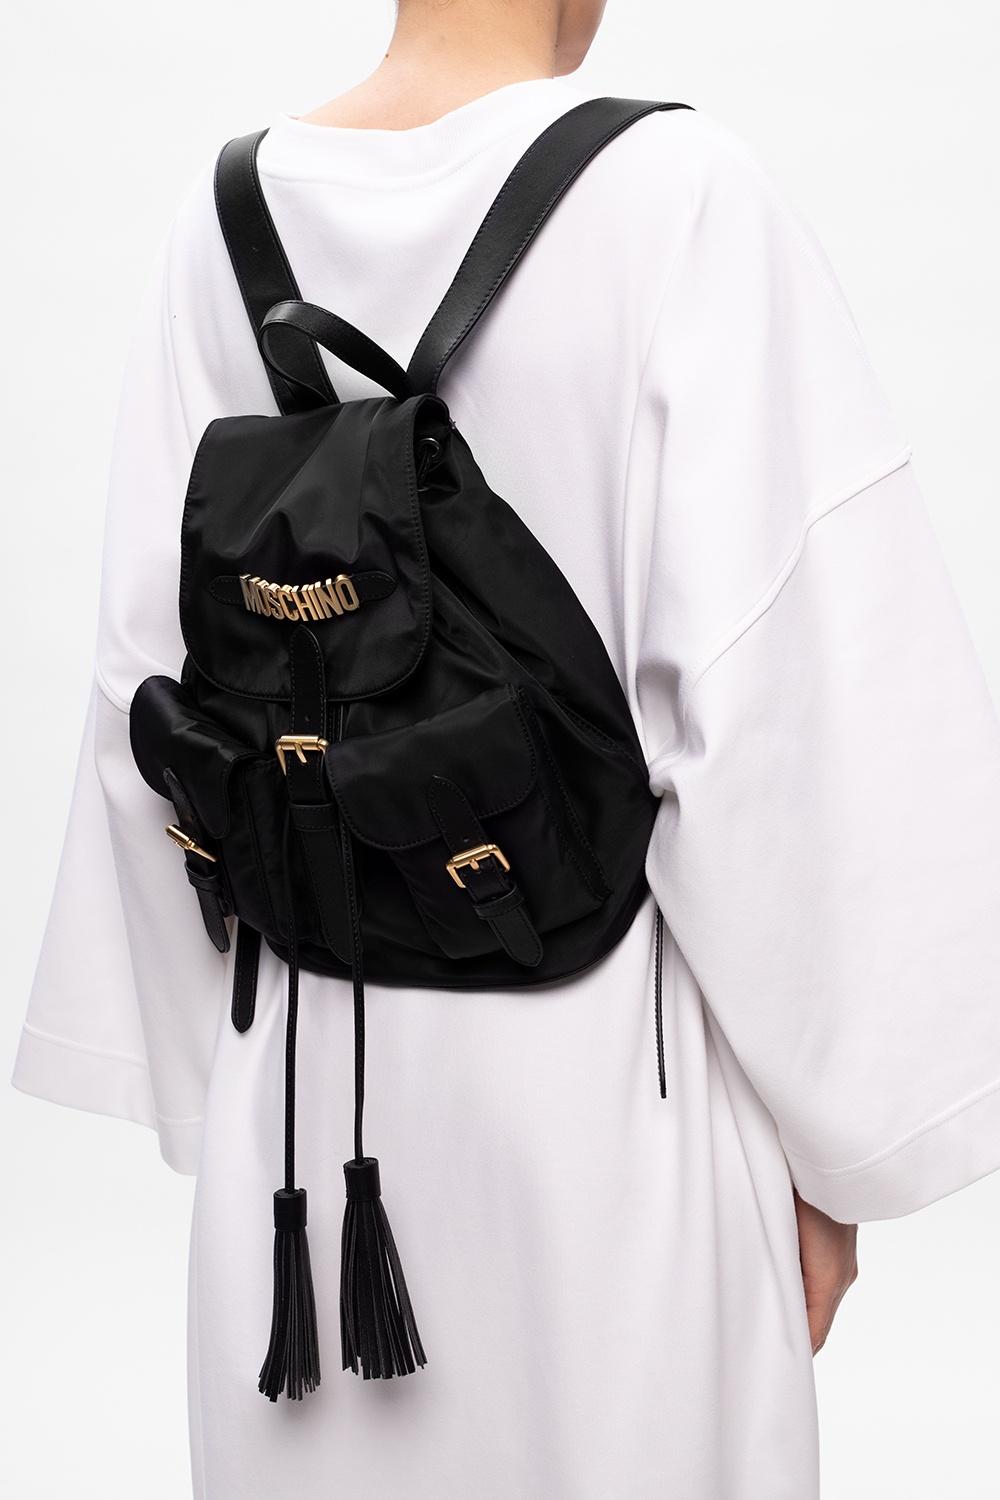 Moschino Backpack With Pockets in Black | Lyst